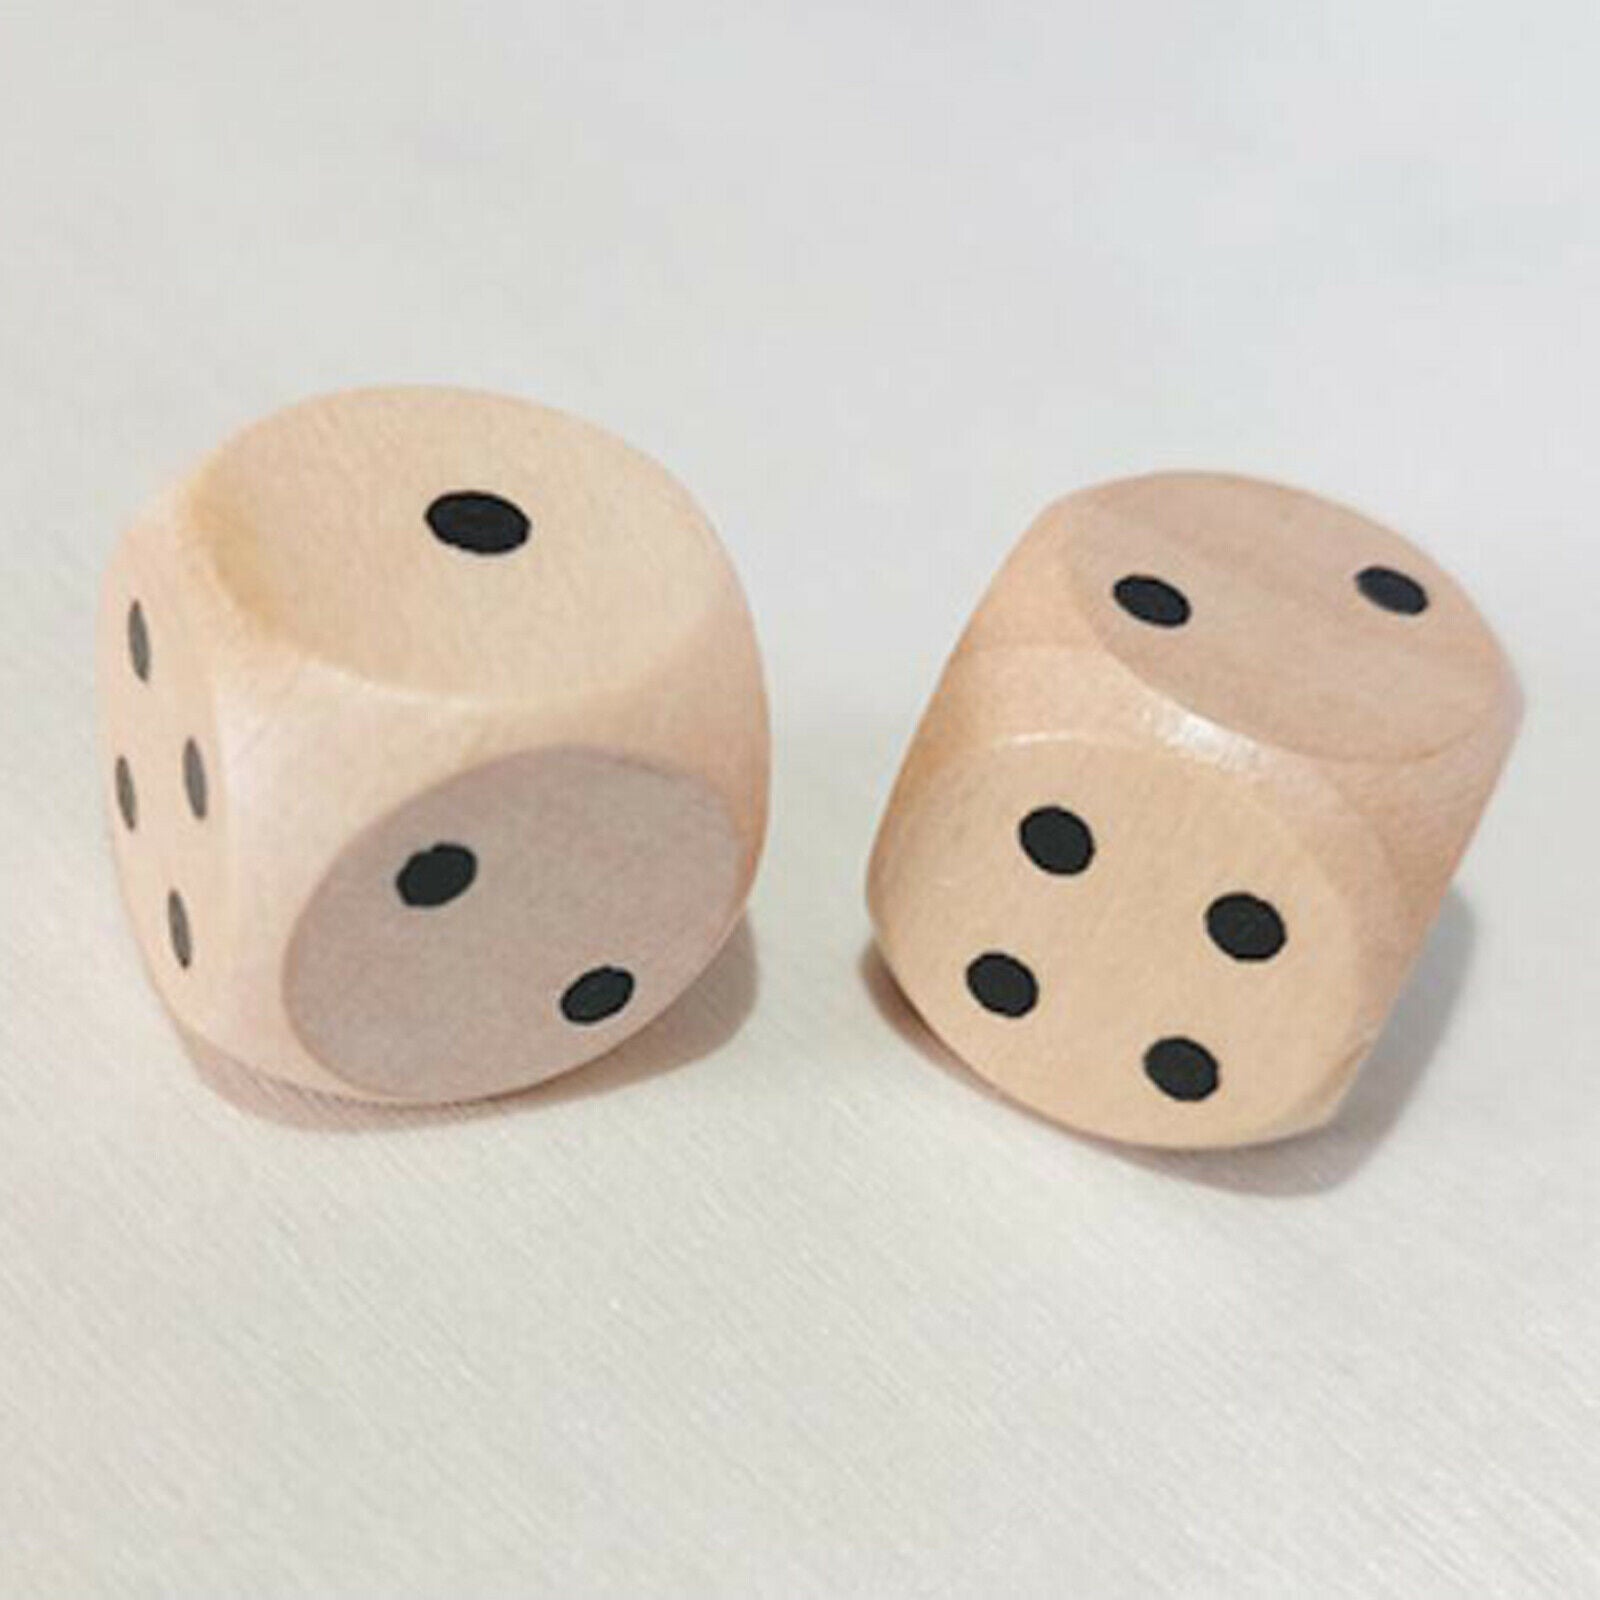 Shut The Box Dice Board Game Wooden Flaps for Pub Gift Party Entertainment,